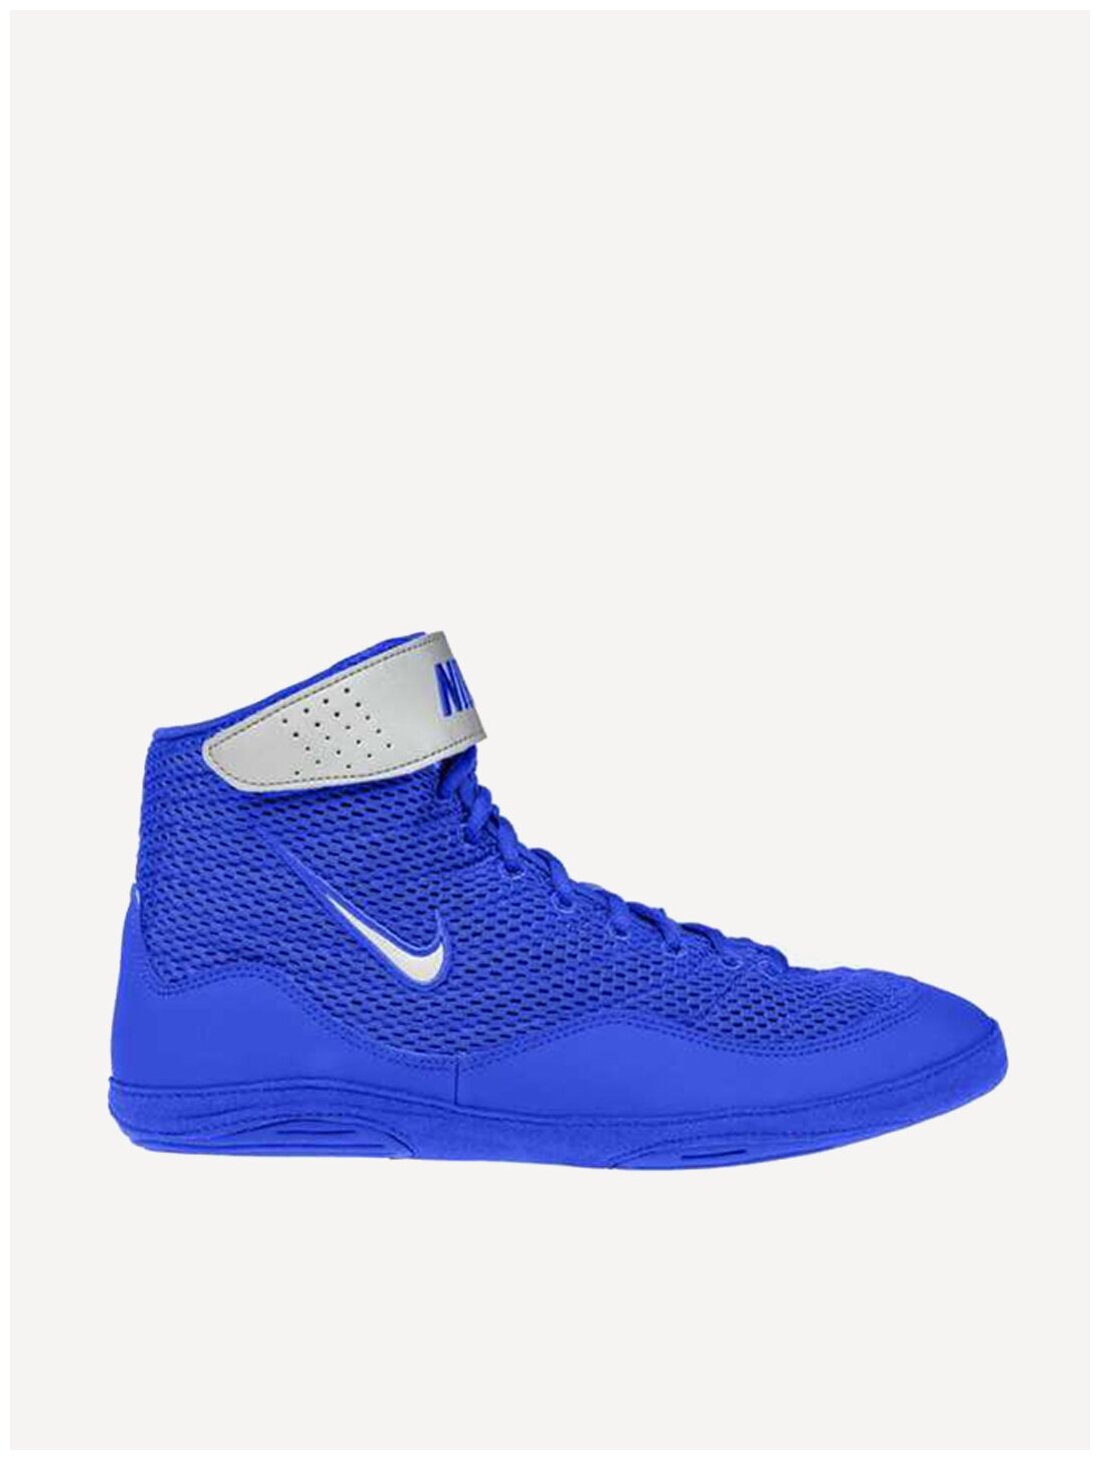 nike inflict blue